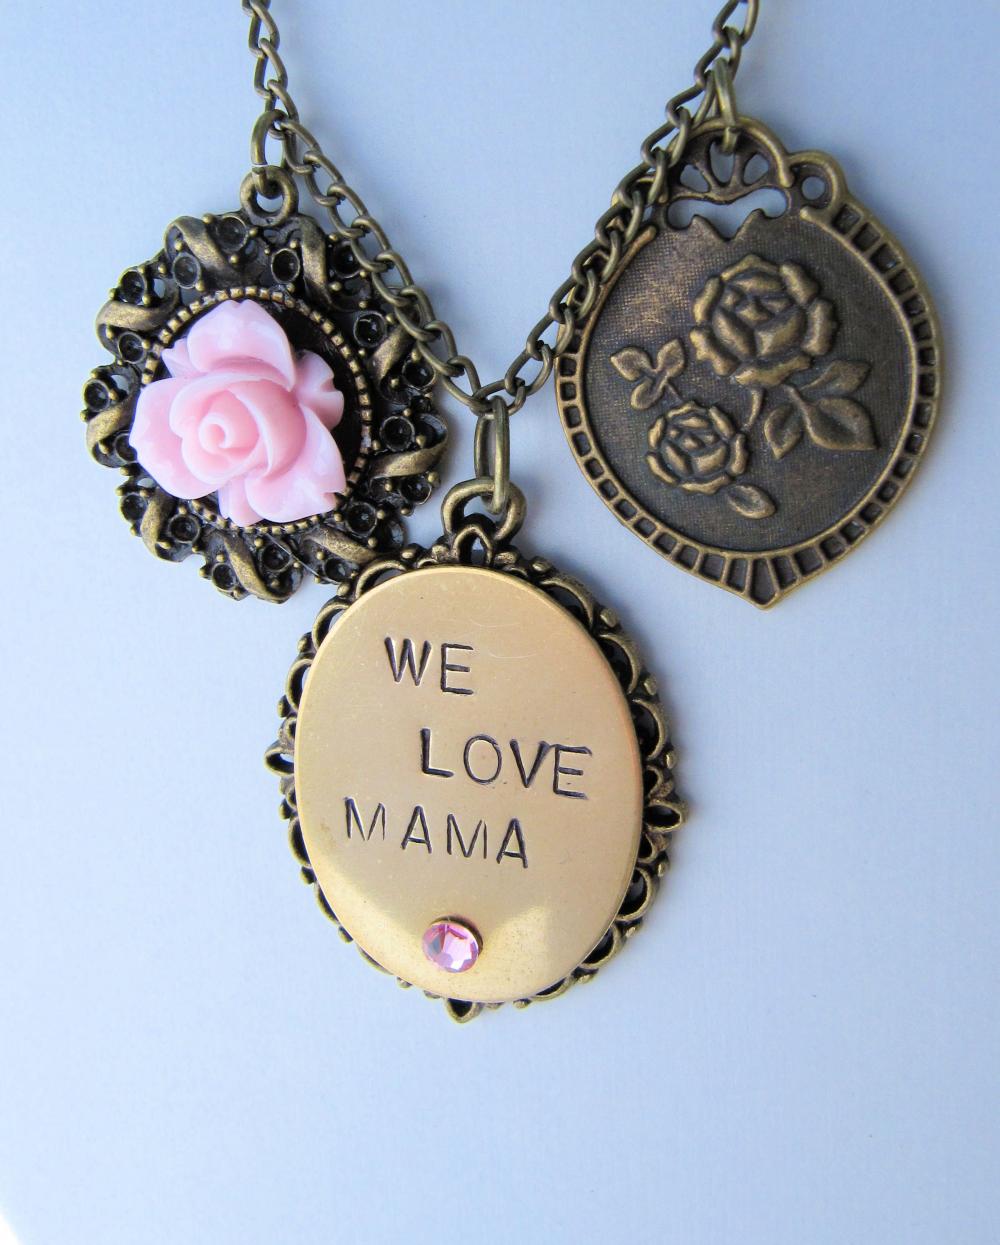 We Love Mama Necklace, Hand Stamped, Romantic Jewelry